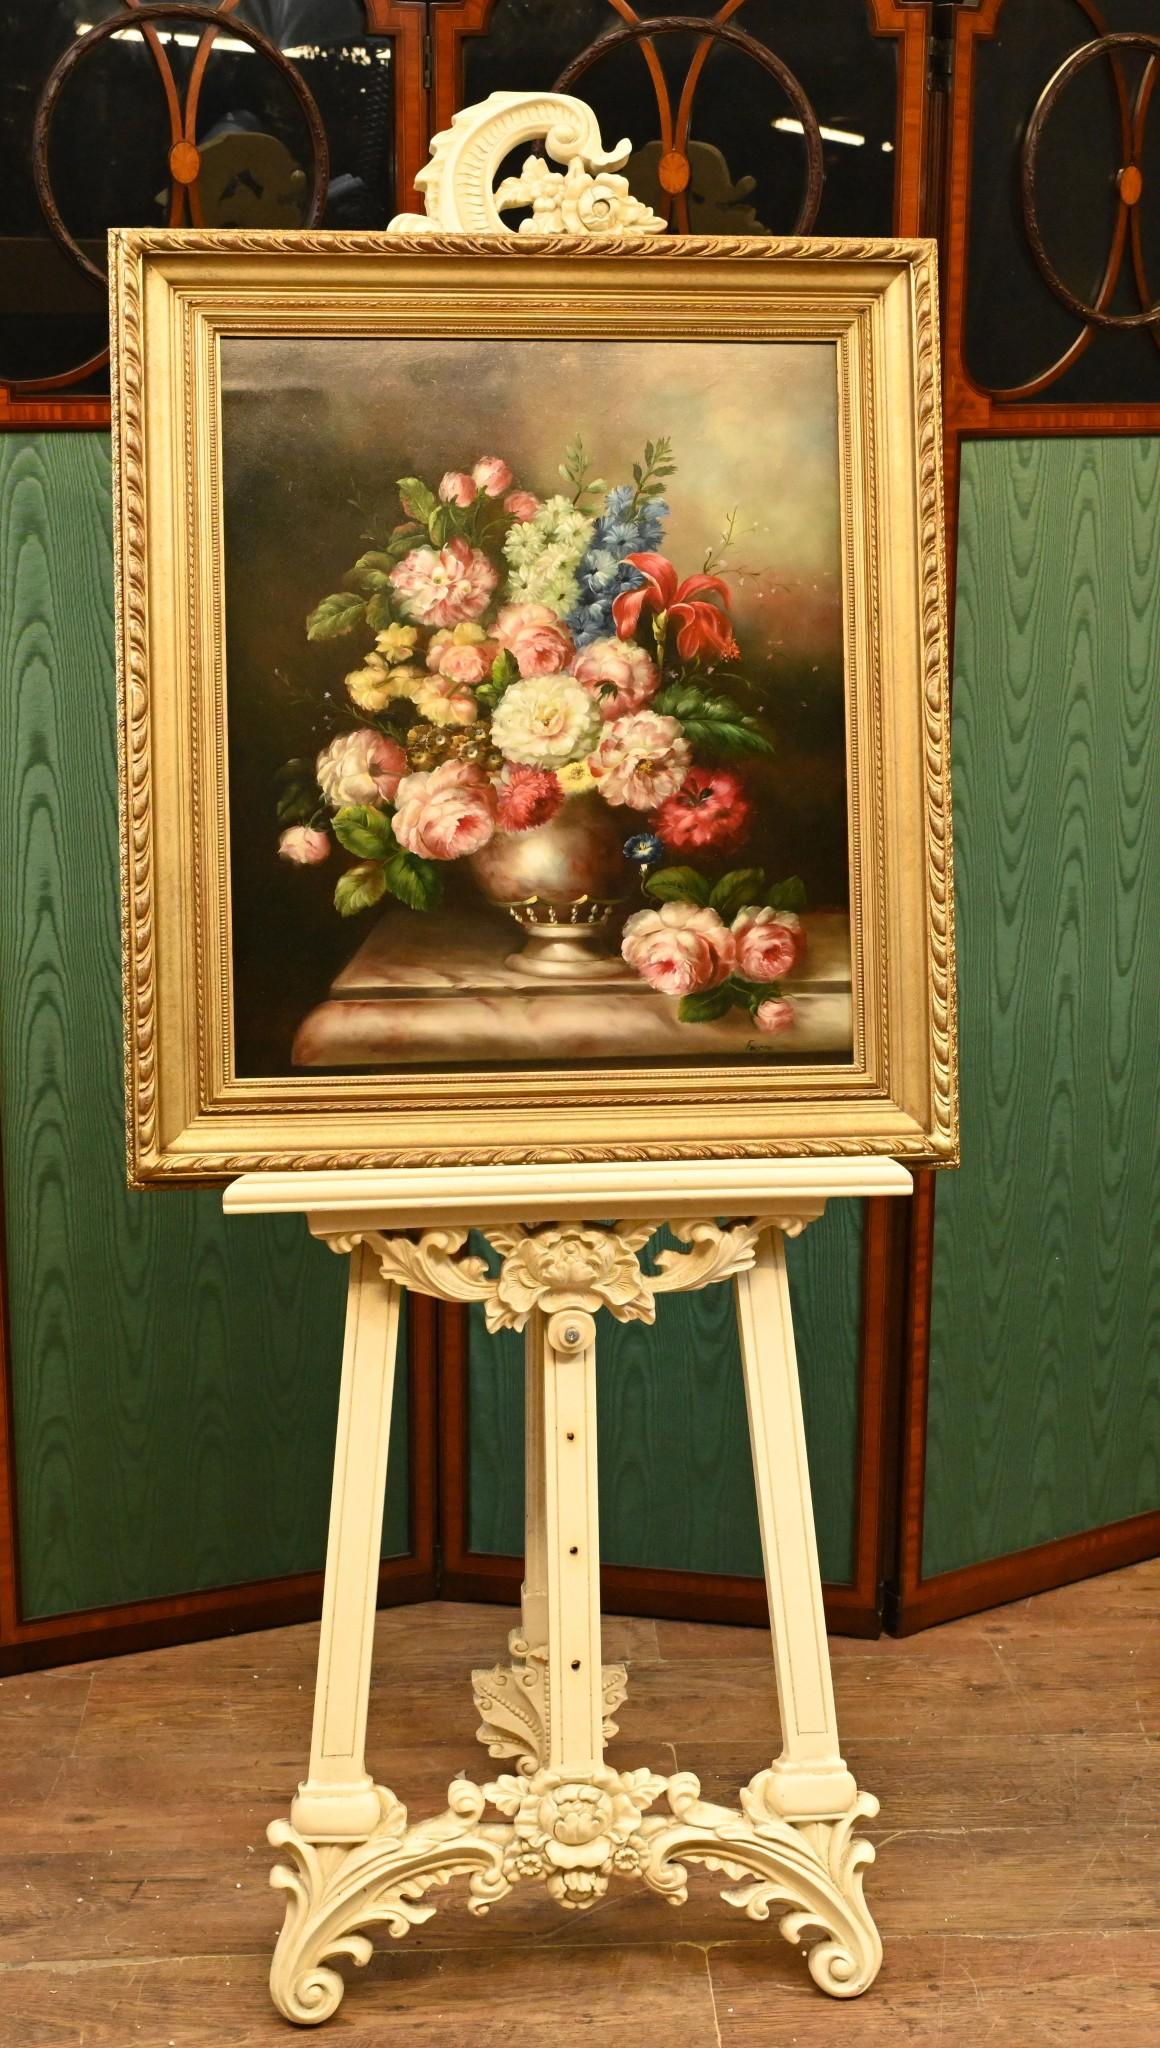 Gorgeous hand painted still life oil painting in the Regency manner
Very vivid and bright, will add light and energy to any room
Comes in elegant gilt frame
Offered in great shape ready for home use right away
We ship to every corner of the planet -